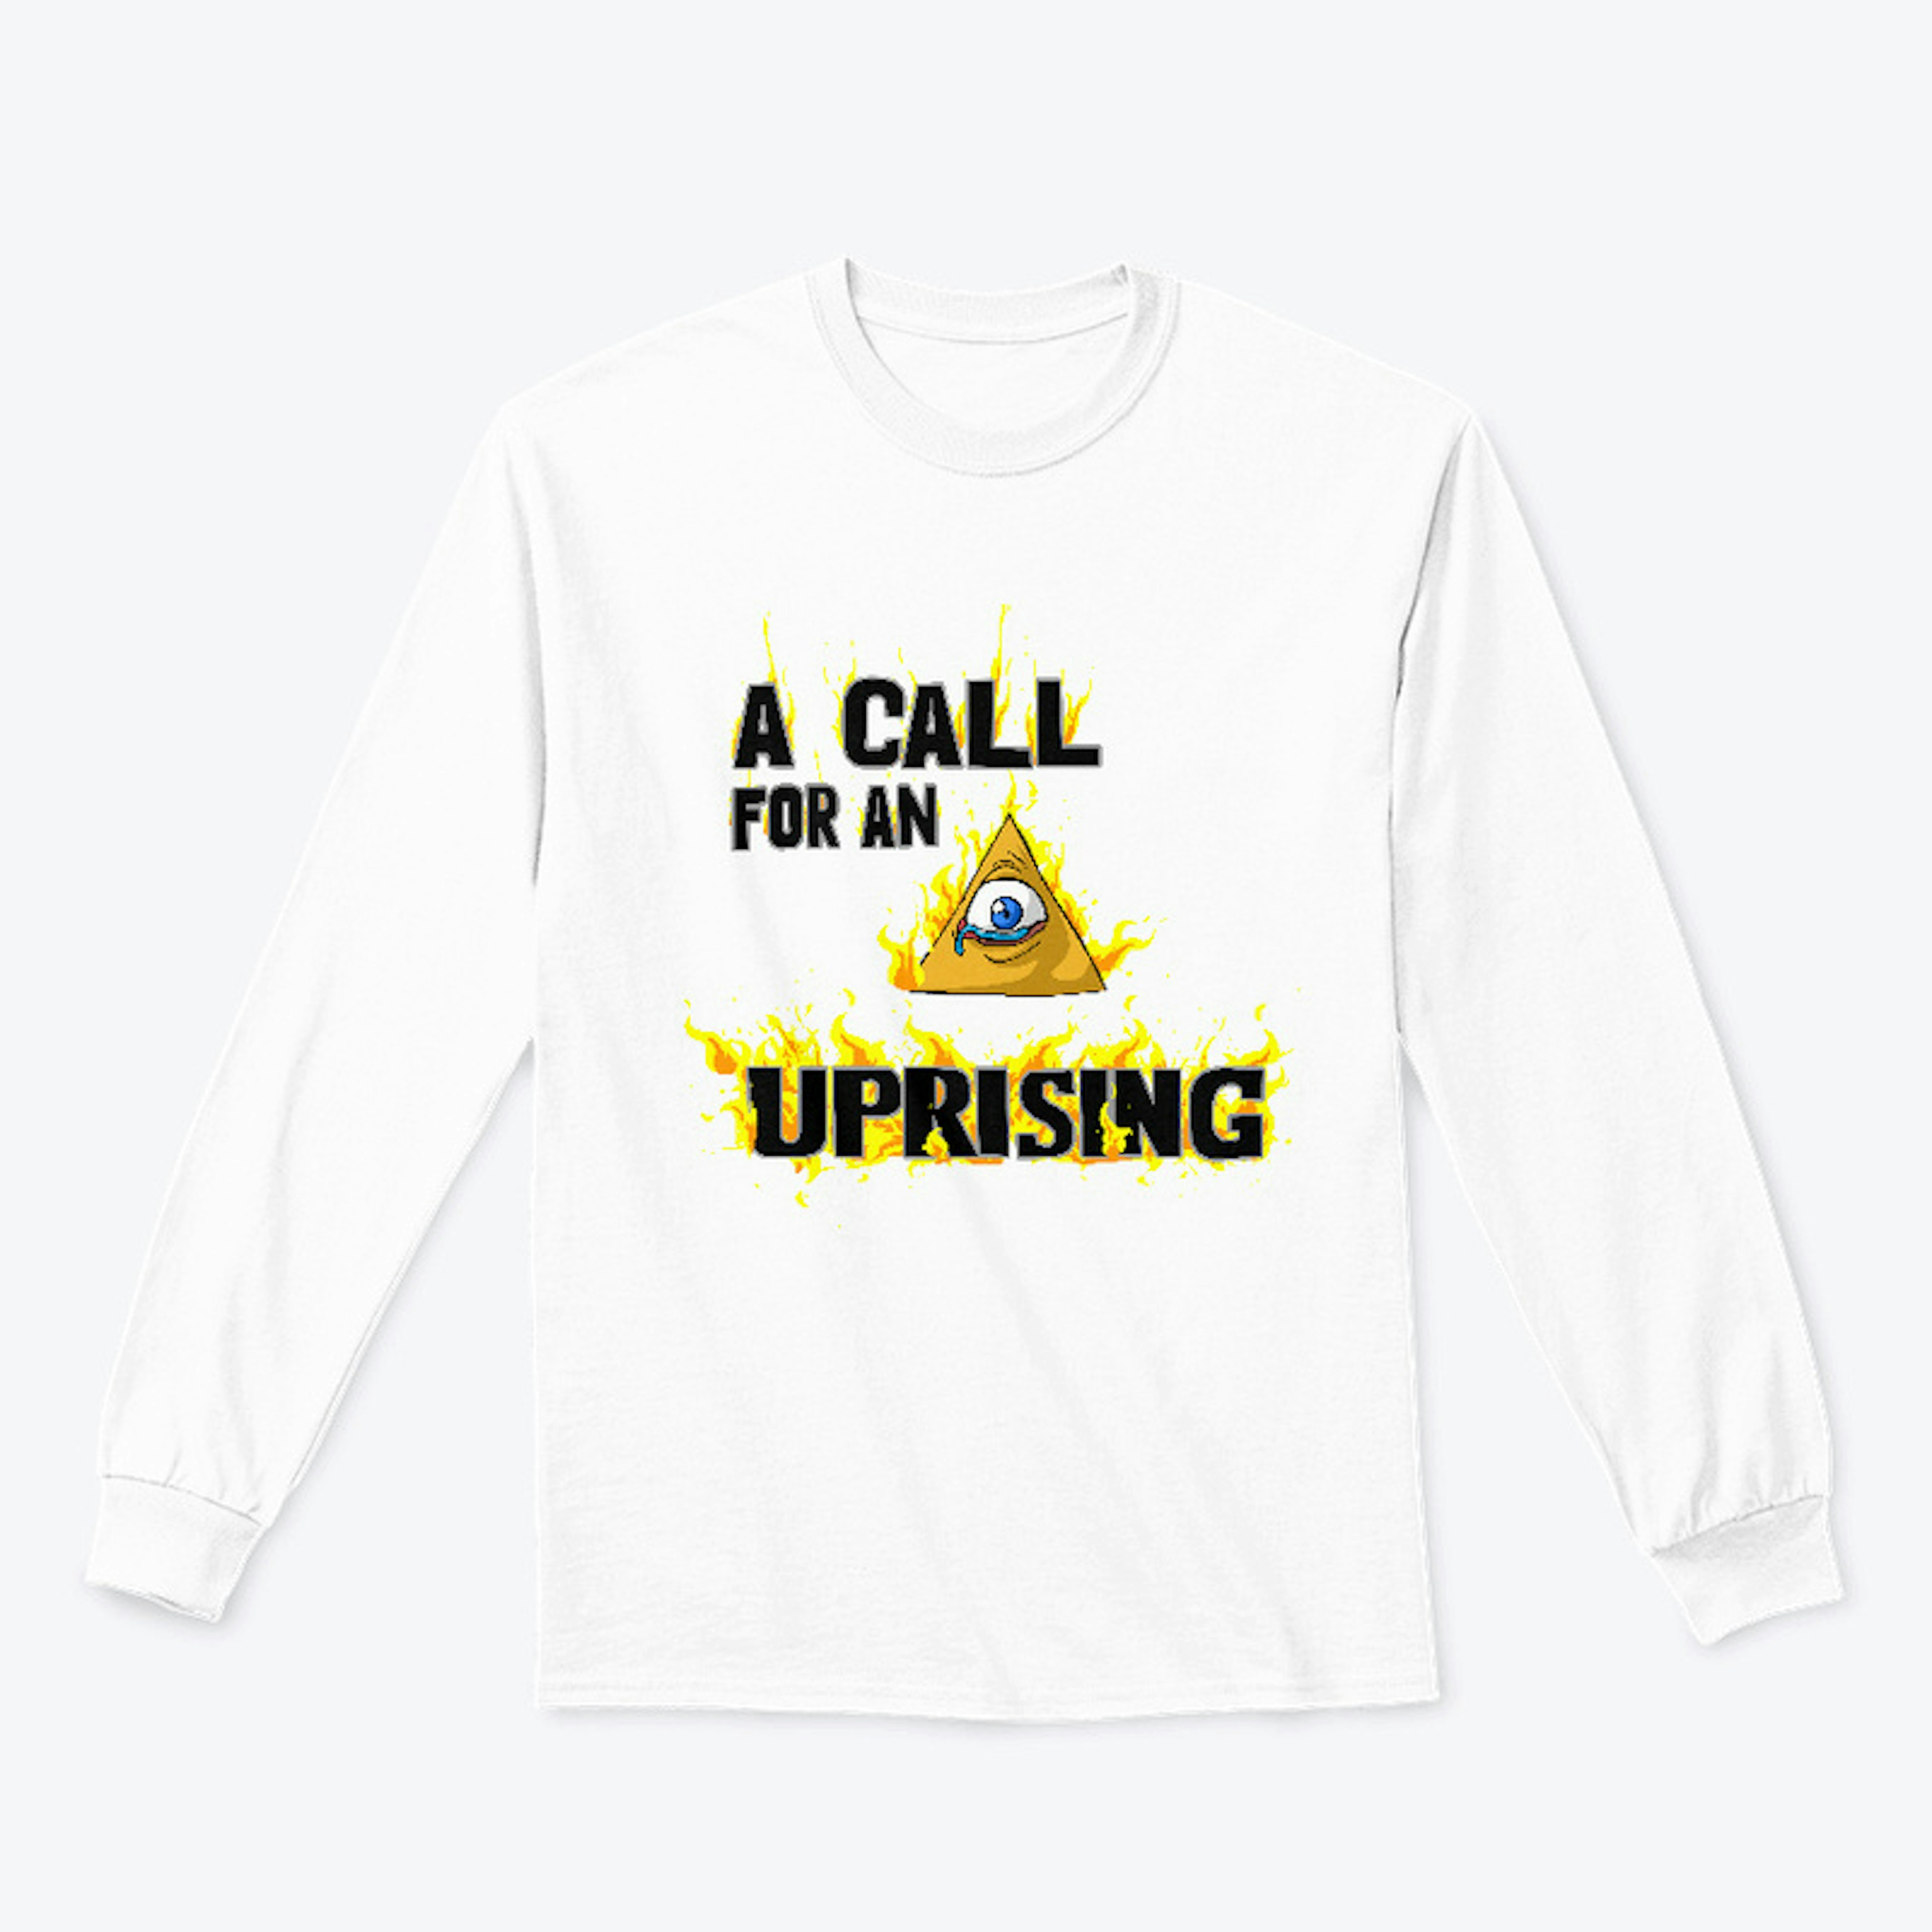 A CALL FOR AN UPRISING